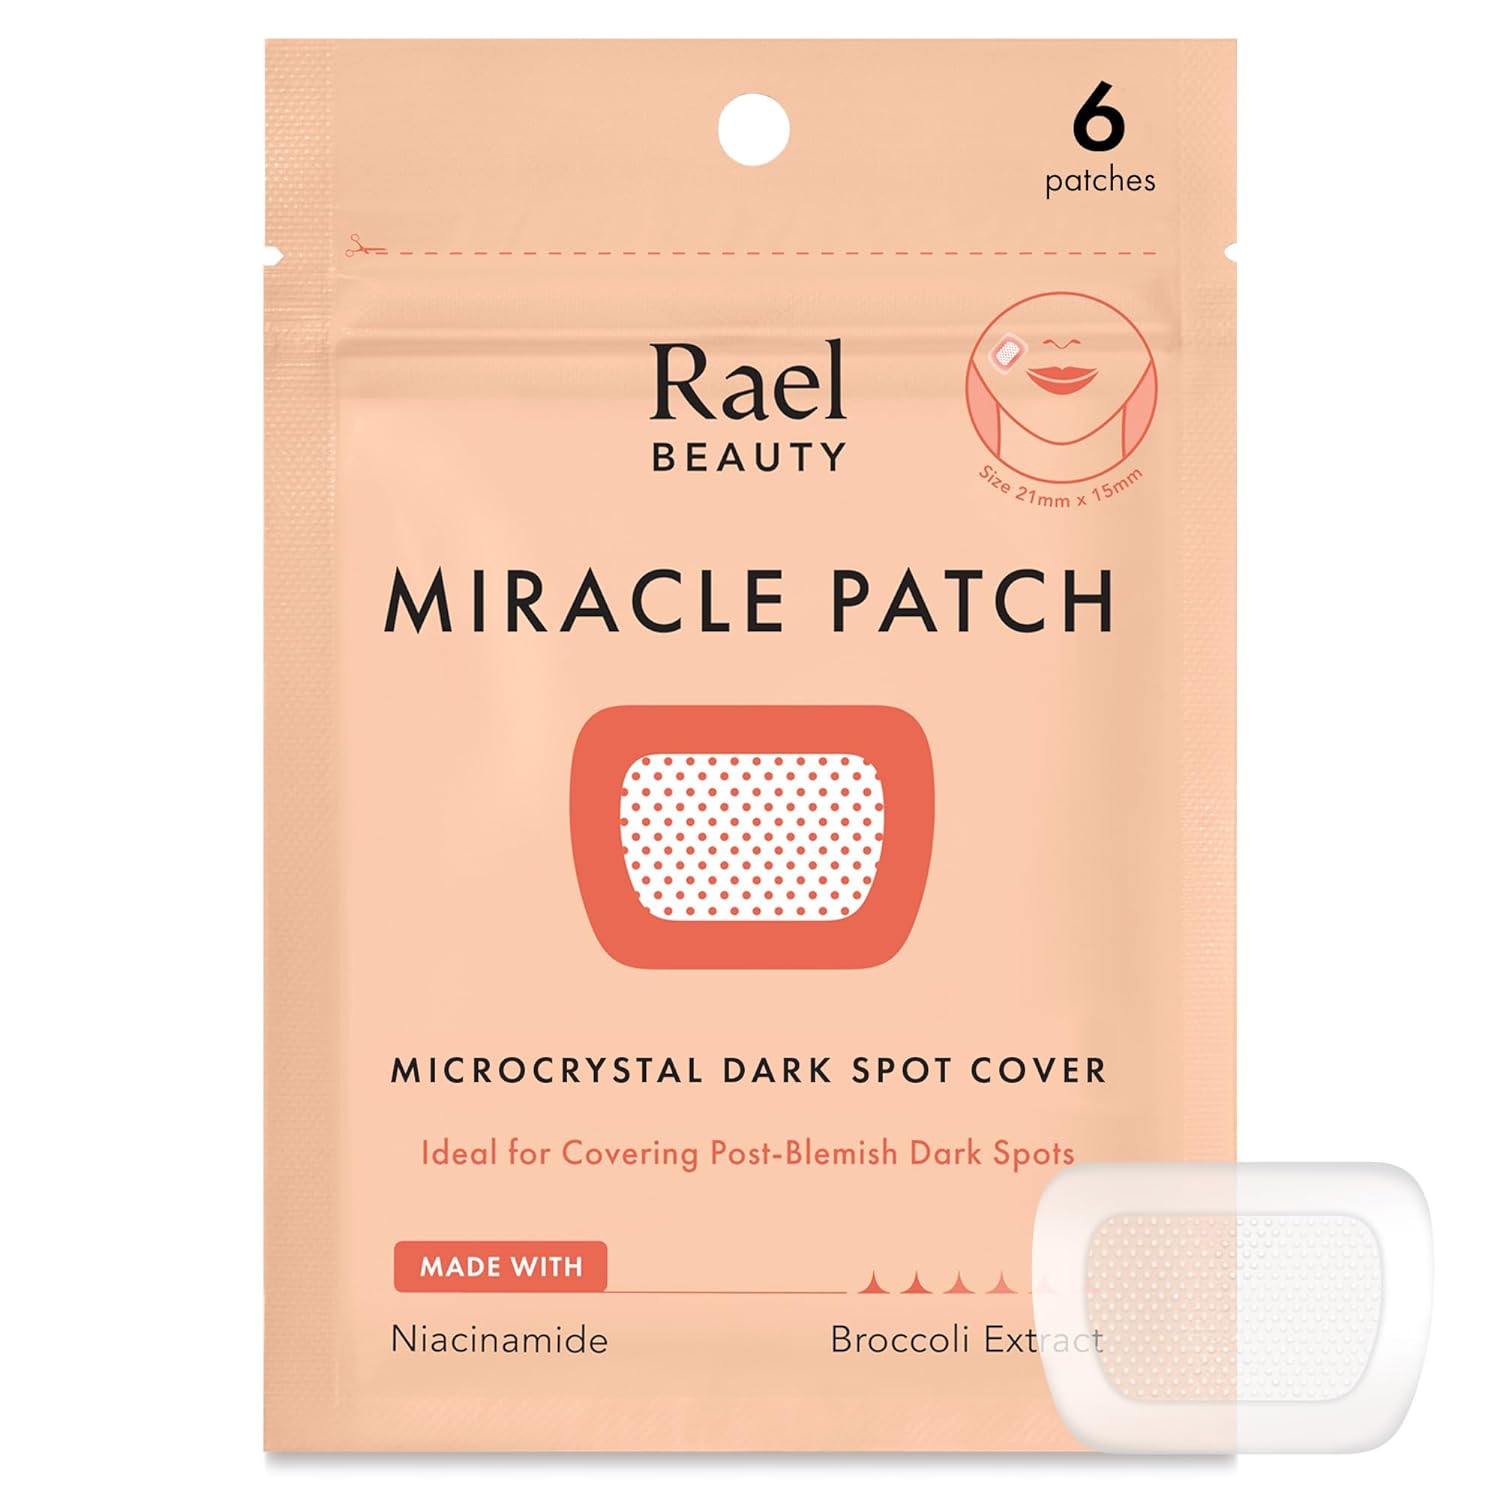 Rael Pimple Patches, Miracle Microcrystal Spot Cover - Dark Spot Corrector, Hydrocolloid, Post Acne, with Skin Brightening, for All Skin Types, Vegan, Cruelty Free (6 Count)